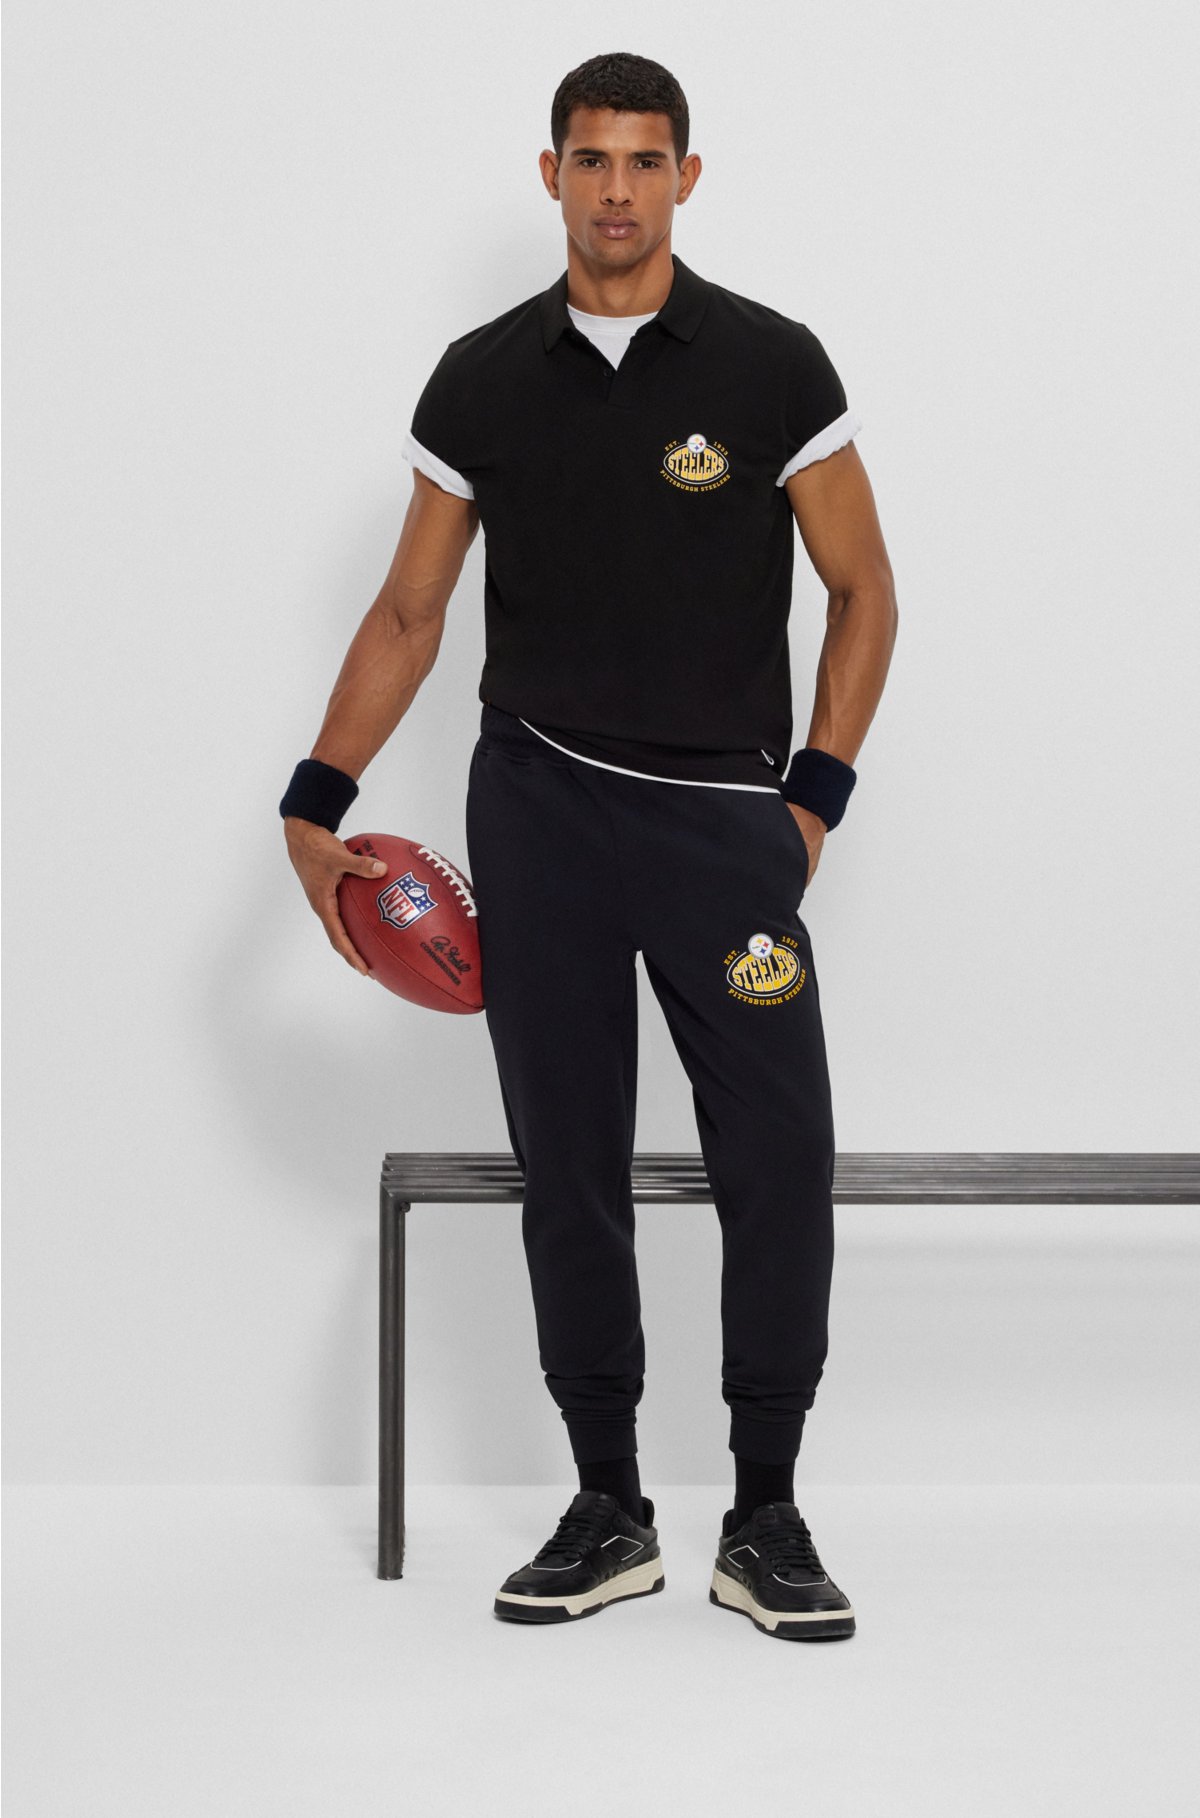 BOSS x NFL cotton-piqué polo shirt with collaborative branding, Steelers